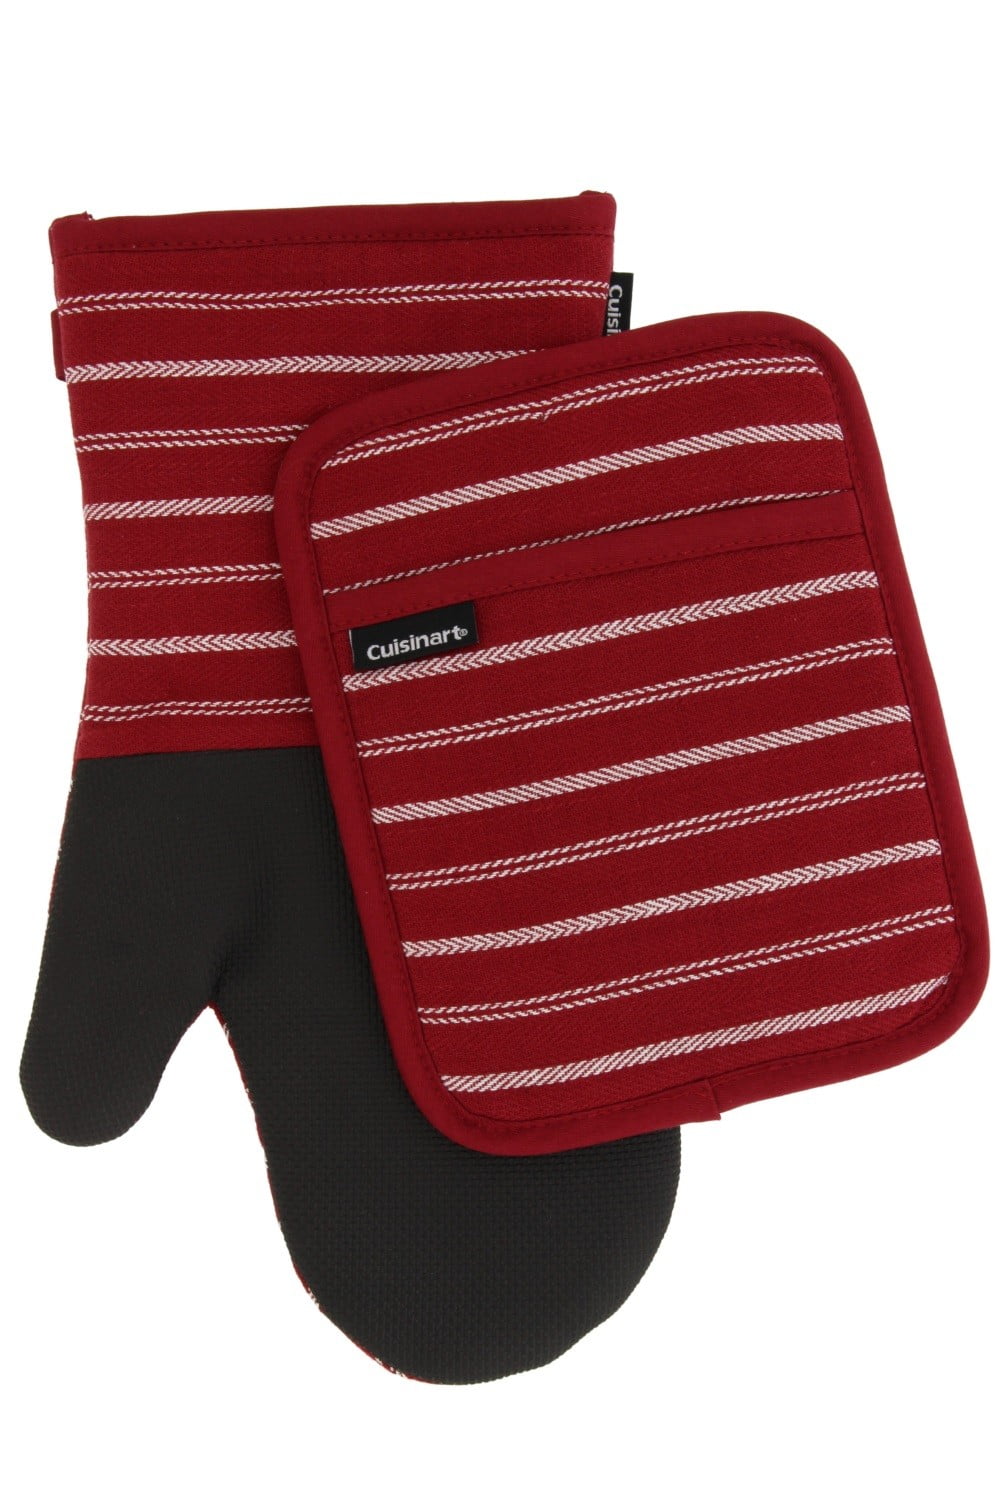 Cuisinart Pink Kitchen Oven Mitts